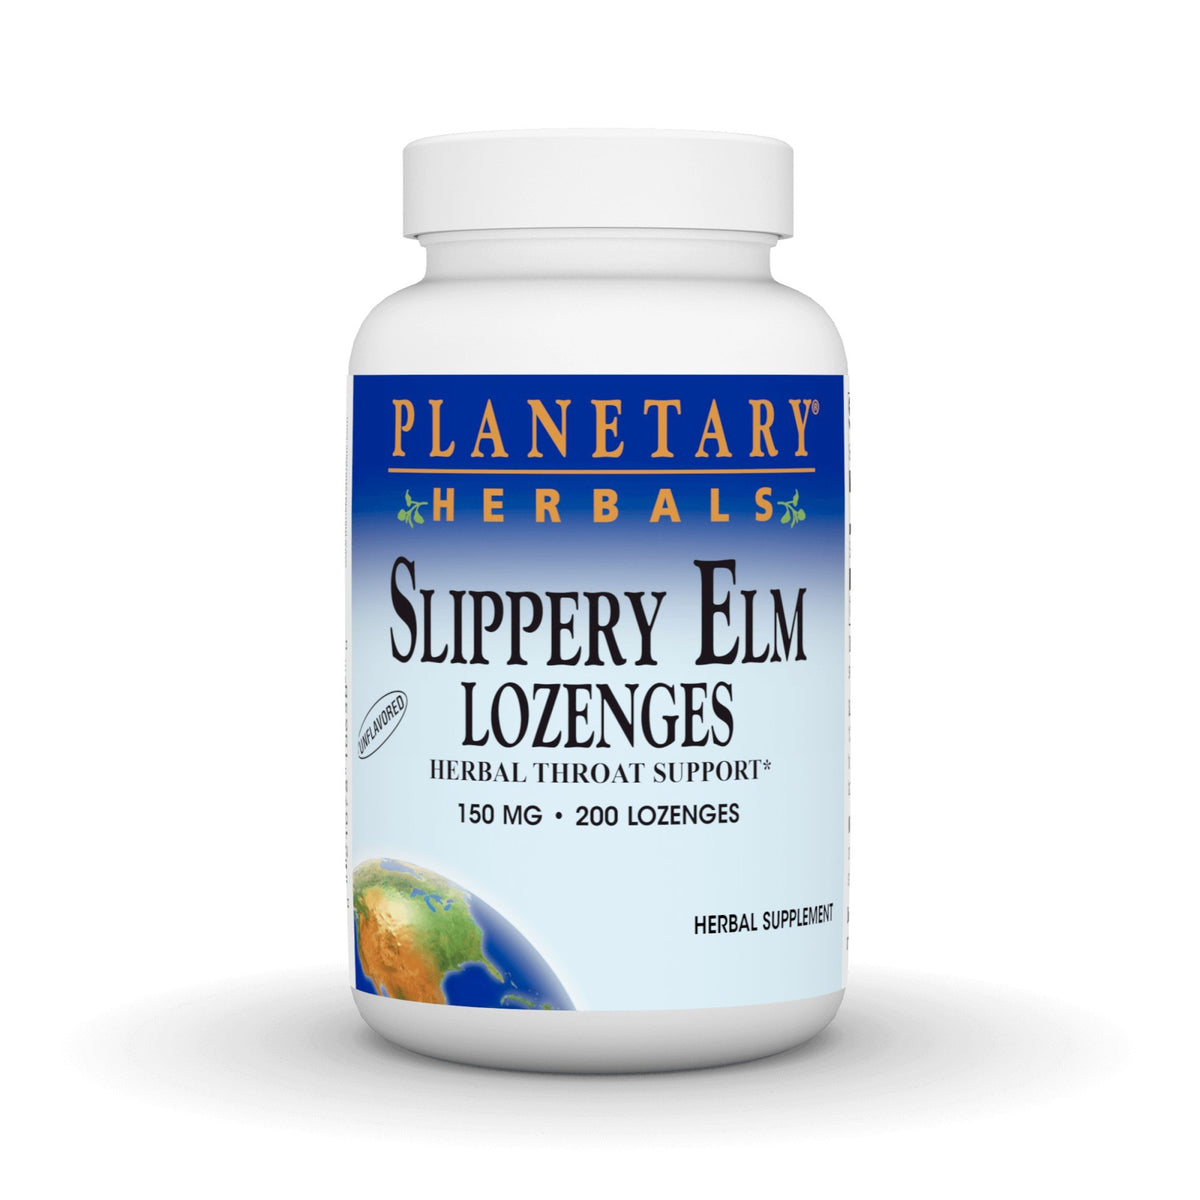 Planetary Herbals Slippery Elm Lozenges Unflavored 200 Tablet